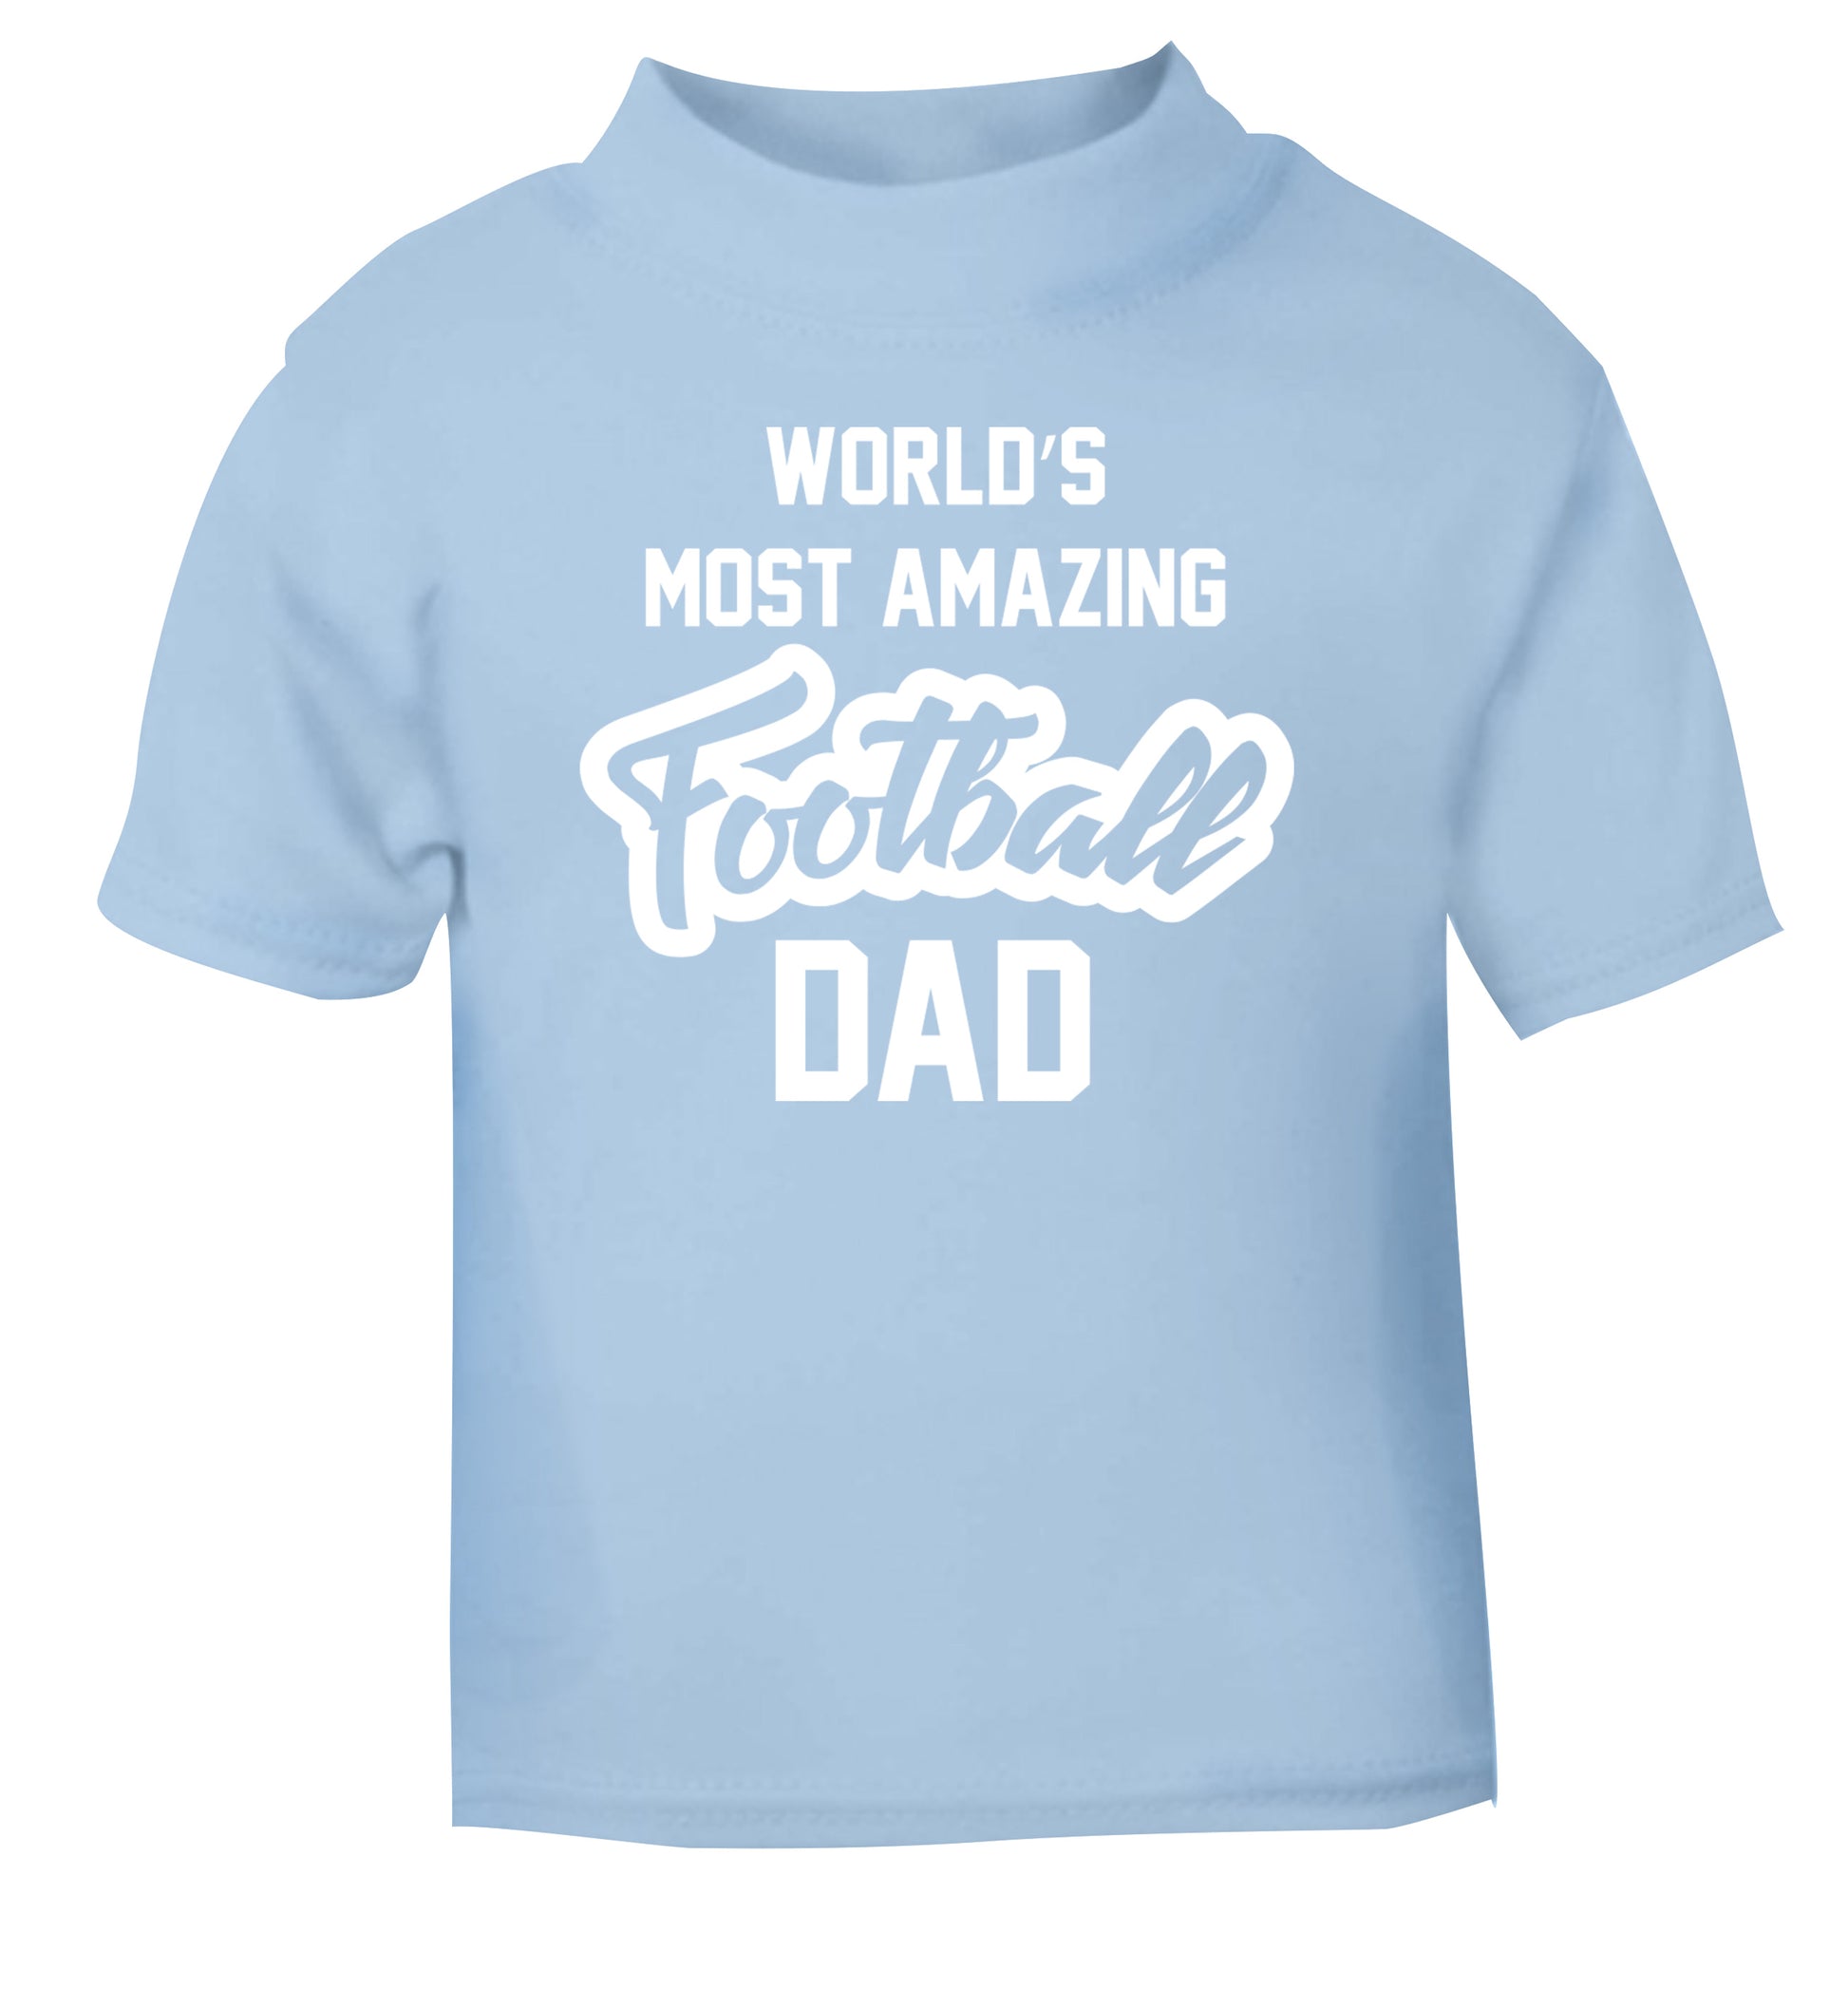 Worlds most amazing football dad light blue Baby Toddler Tshirt 2 Years